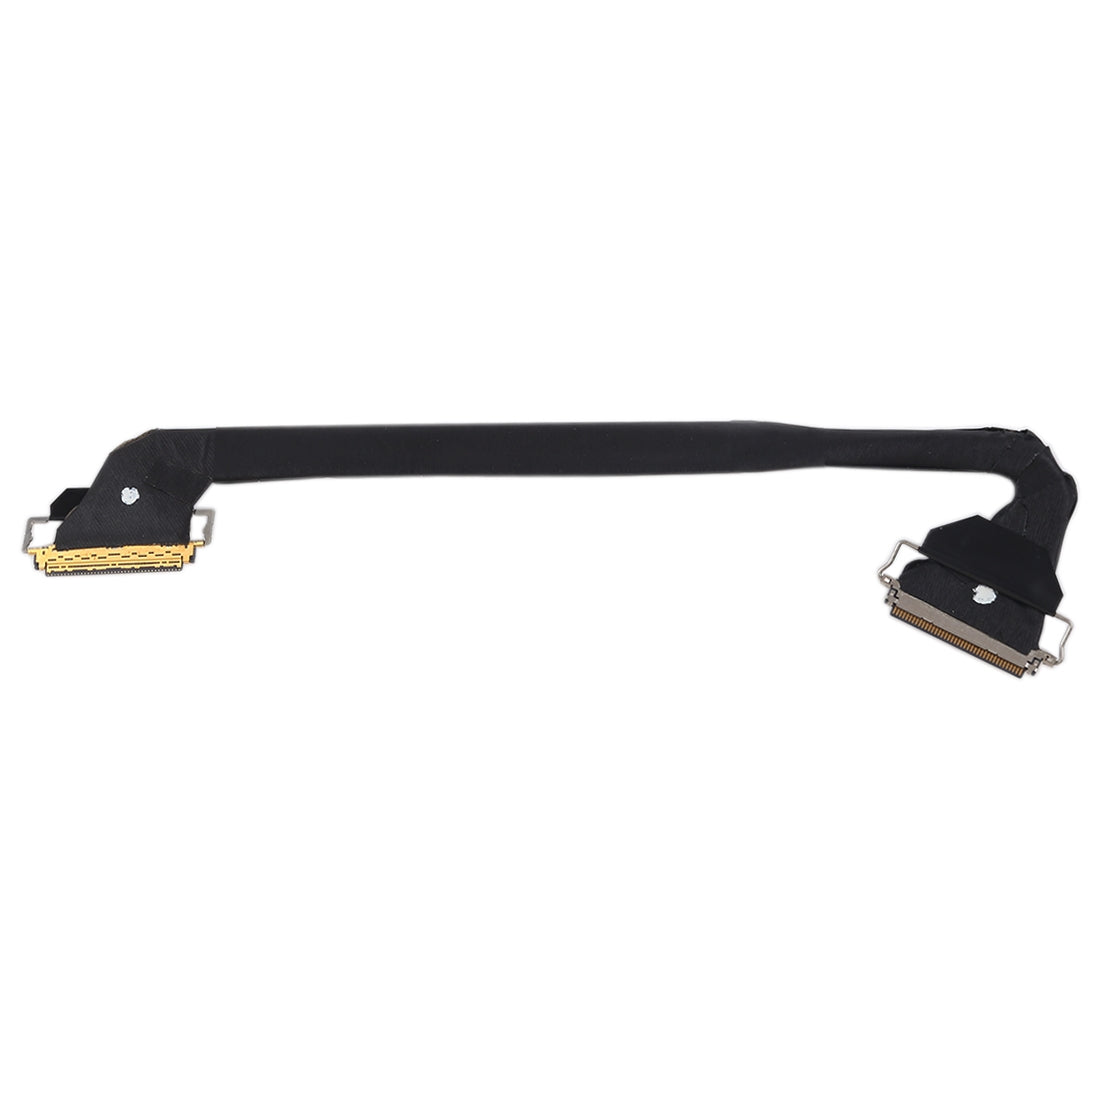 LCD Connector Flex Cable Apple MacBook Pro 15 A1286 2012